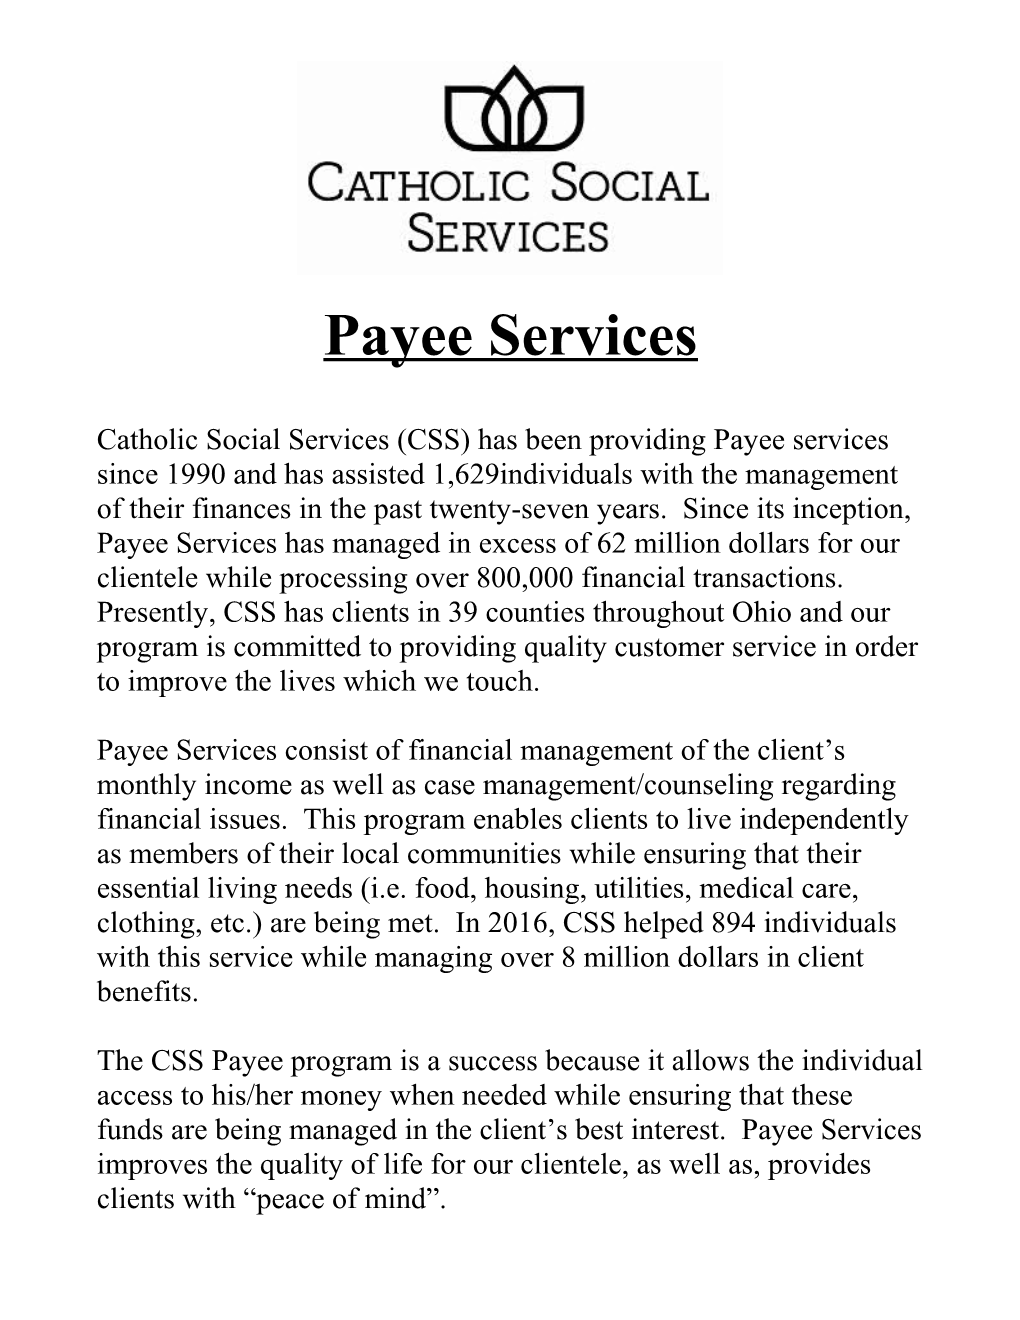 CSS (Zanesville) Provides Payee Services to About 157 Clients at This Present Time